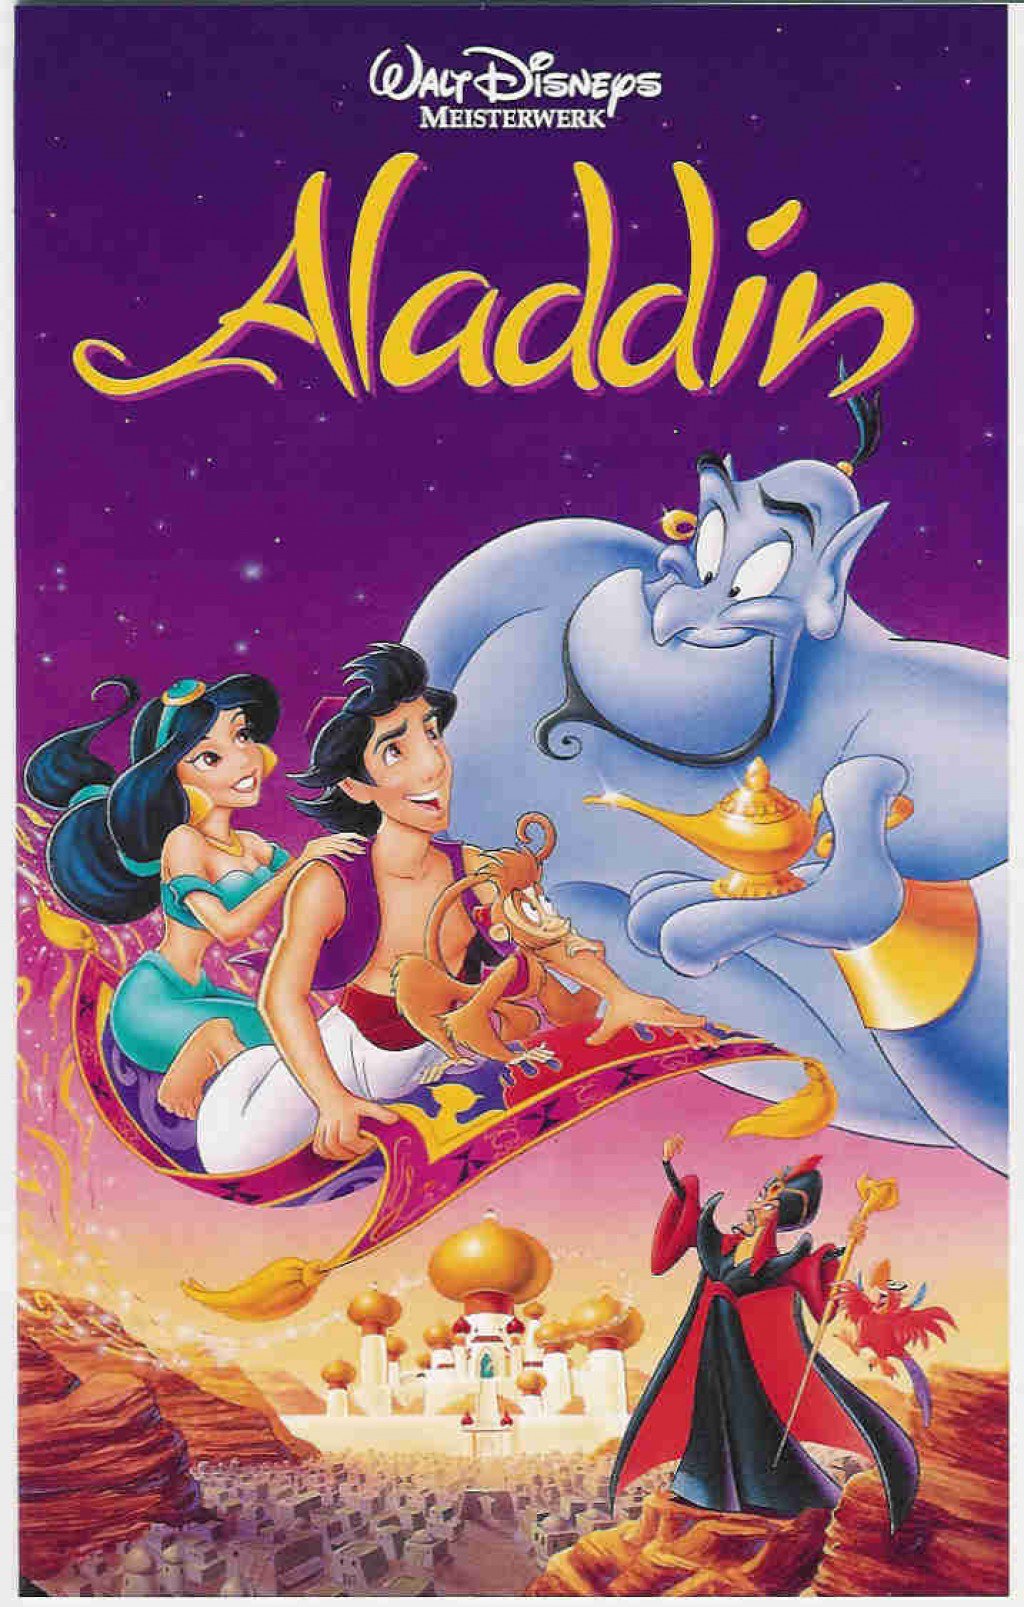 Disney's Aladdin wallpapers, Video Game, HQ Disney's Aladdin pictures